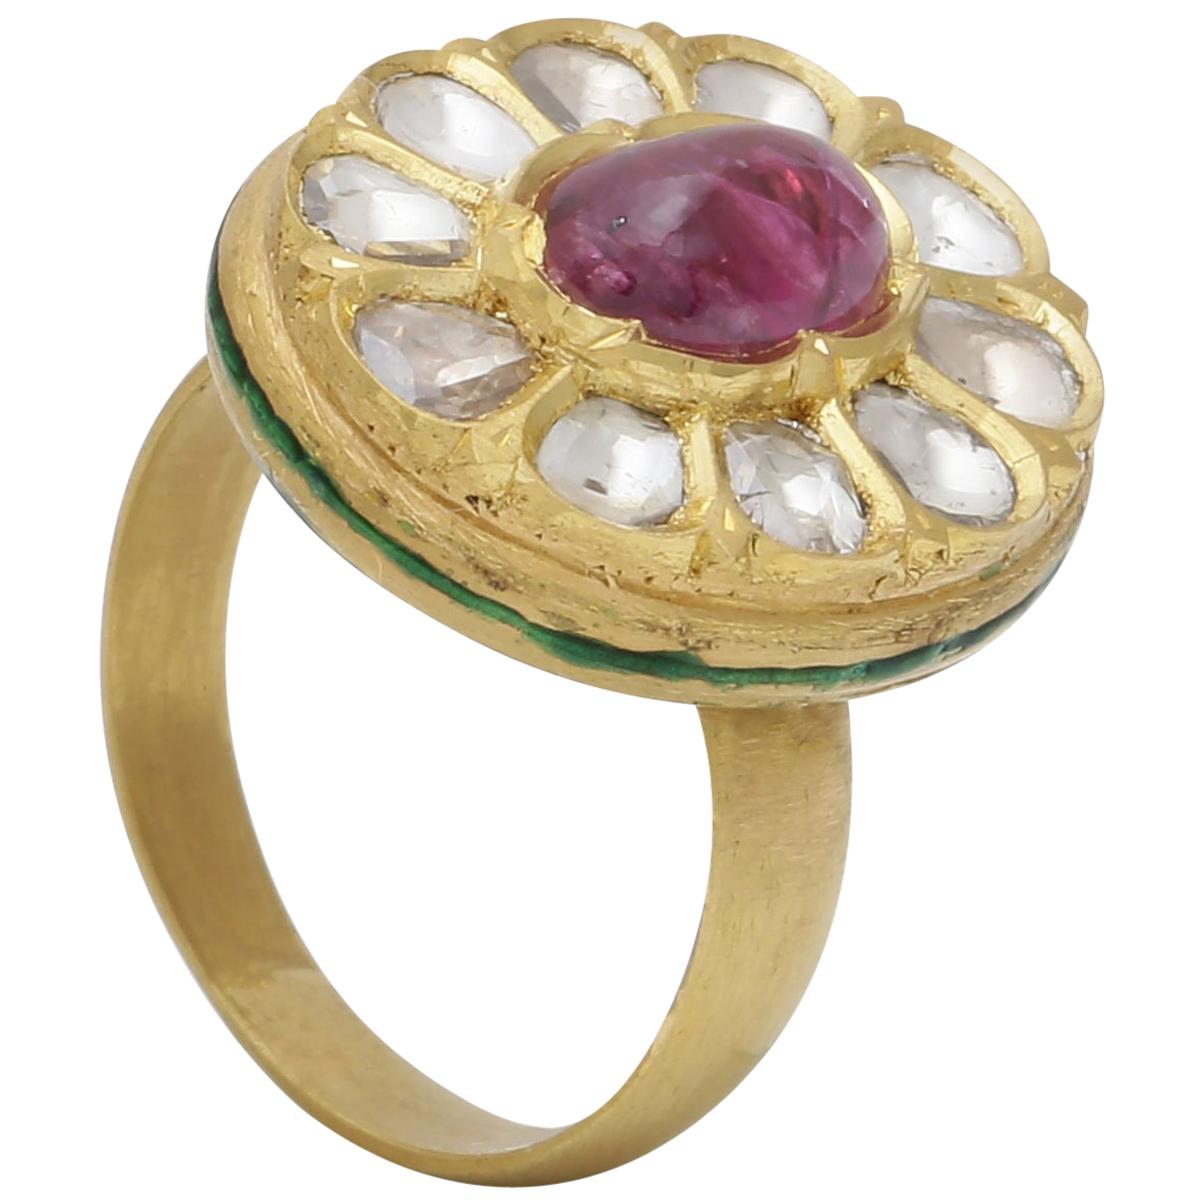 Ruby Cabochon with Uncut Diamonds Enamel Ring Handcrafted in 22K Yellow Gold For Sale